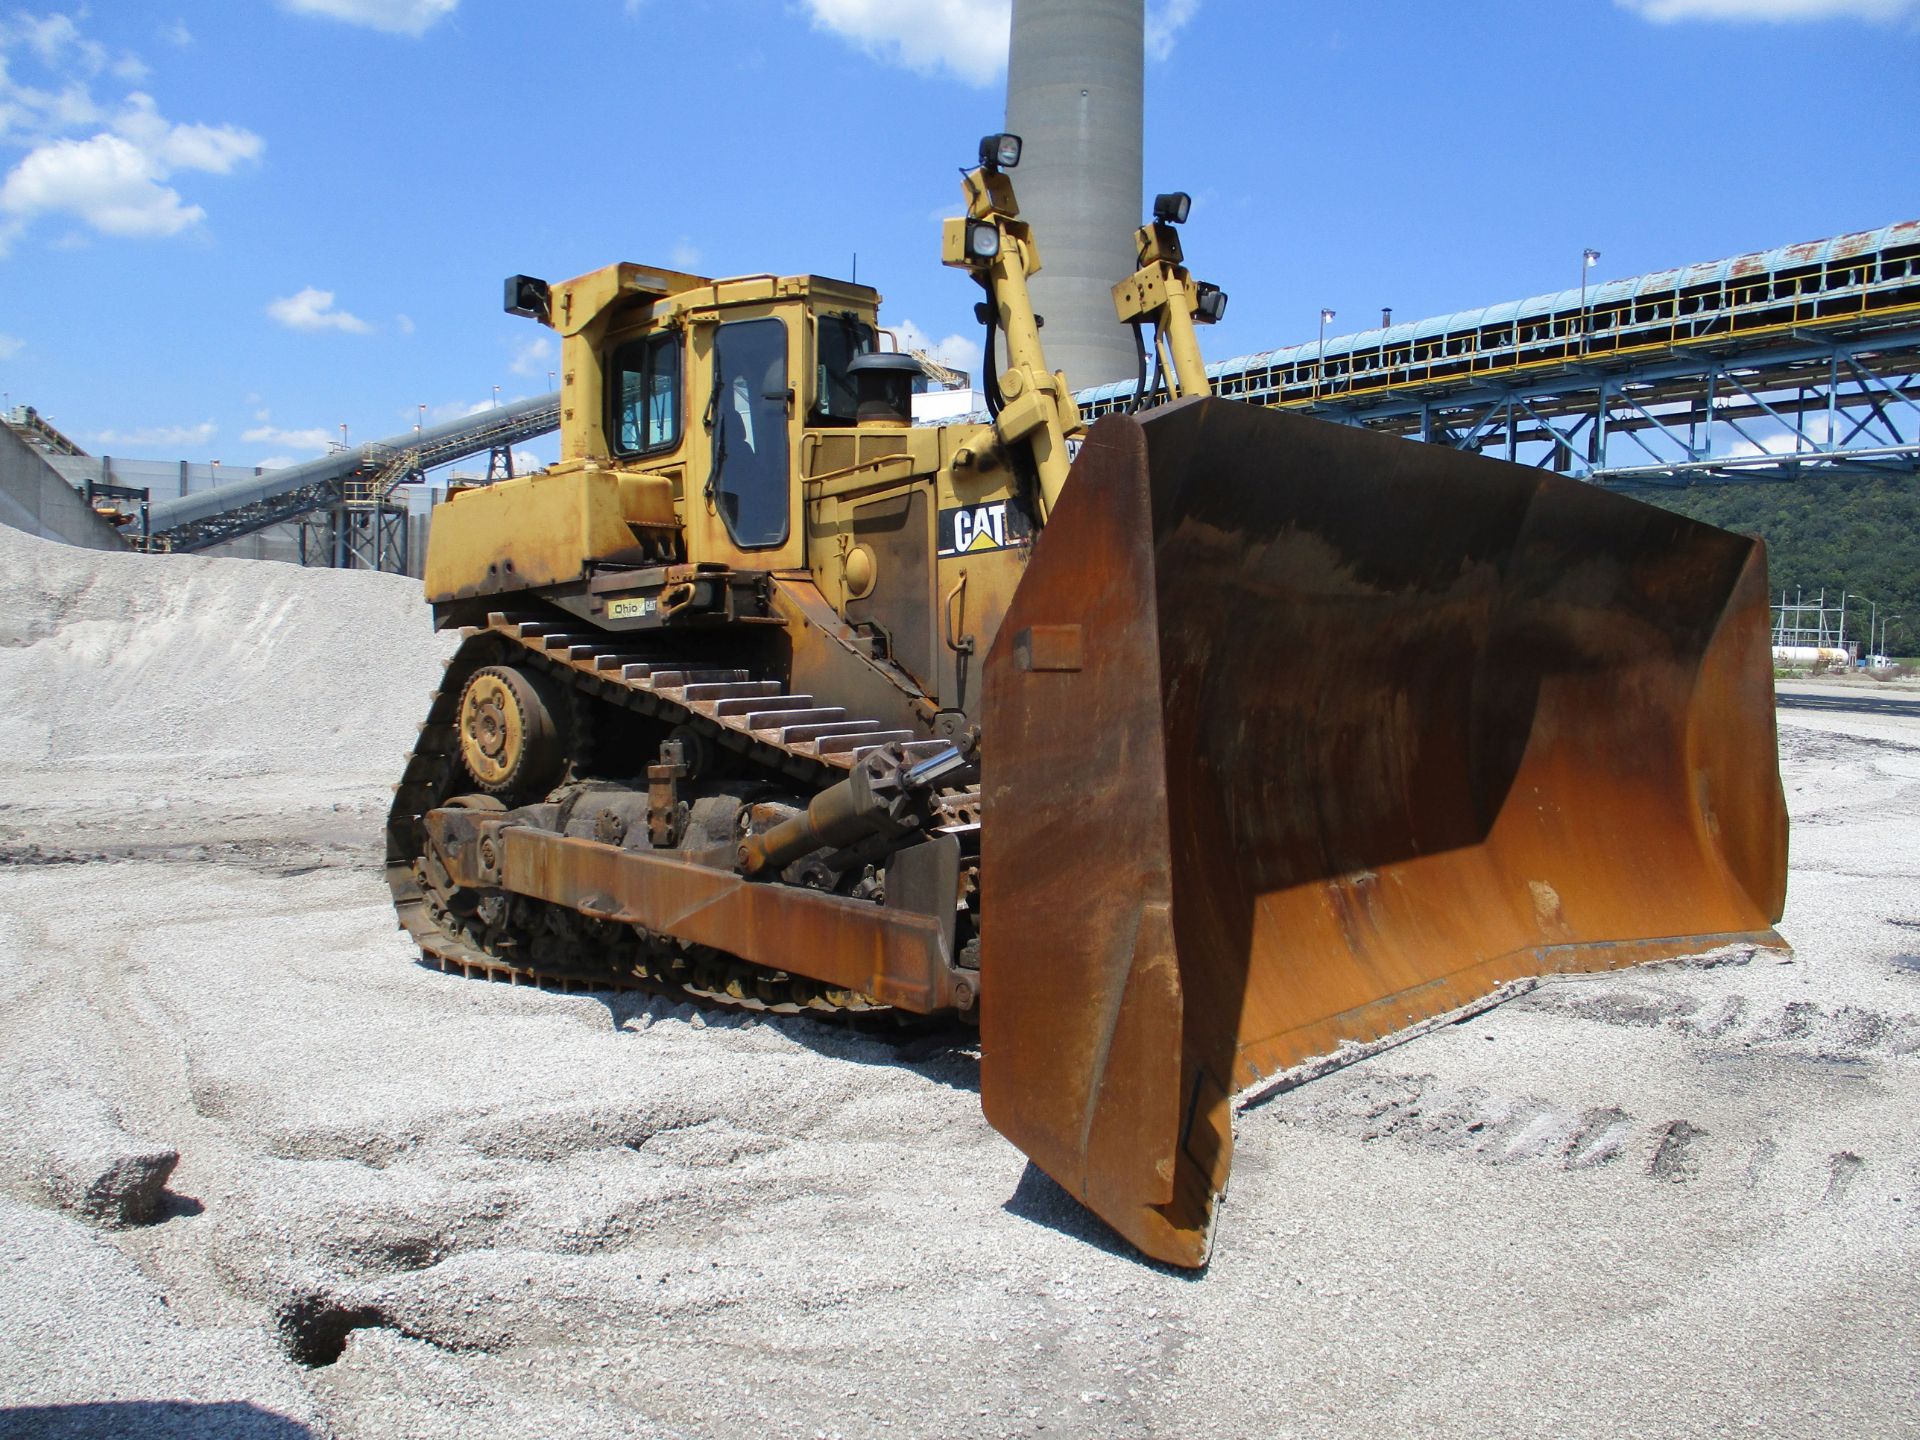 CATERPILLAR MODEL D9R INCLINE TRACK CRAWLER DOZER; S/N D9R-7TL00954, 16,868 HOURS - Image 3 of 11